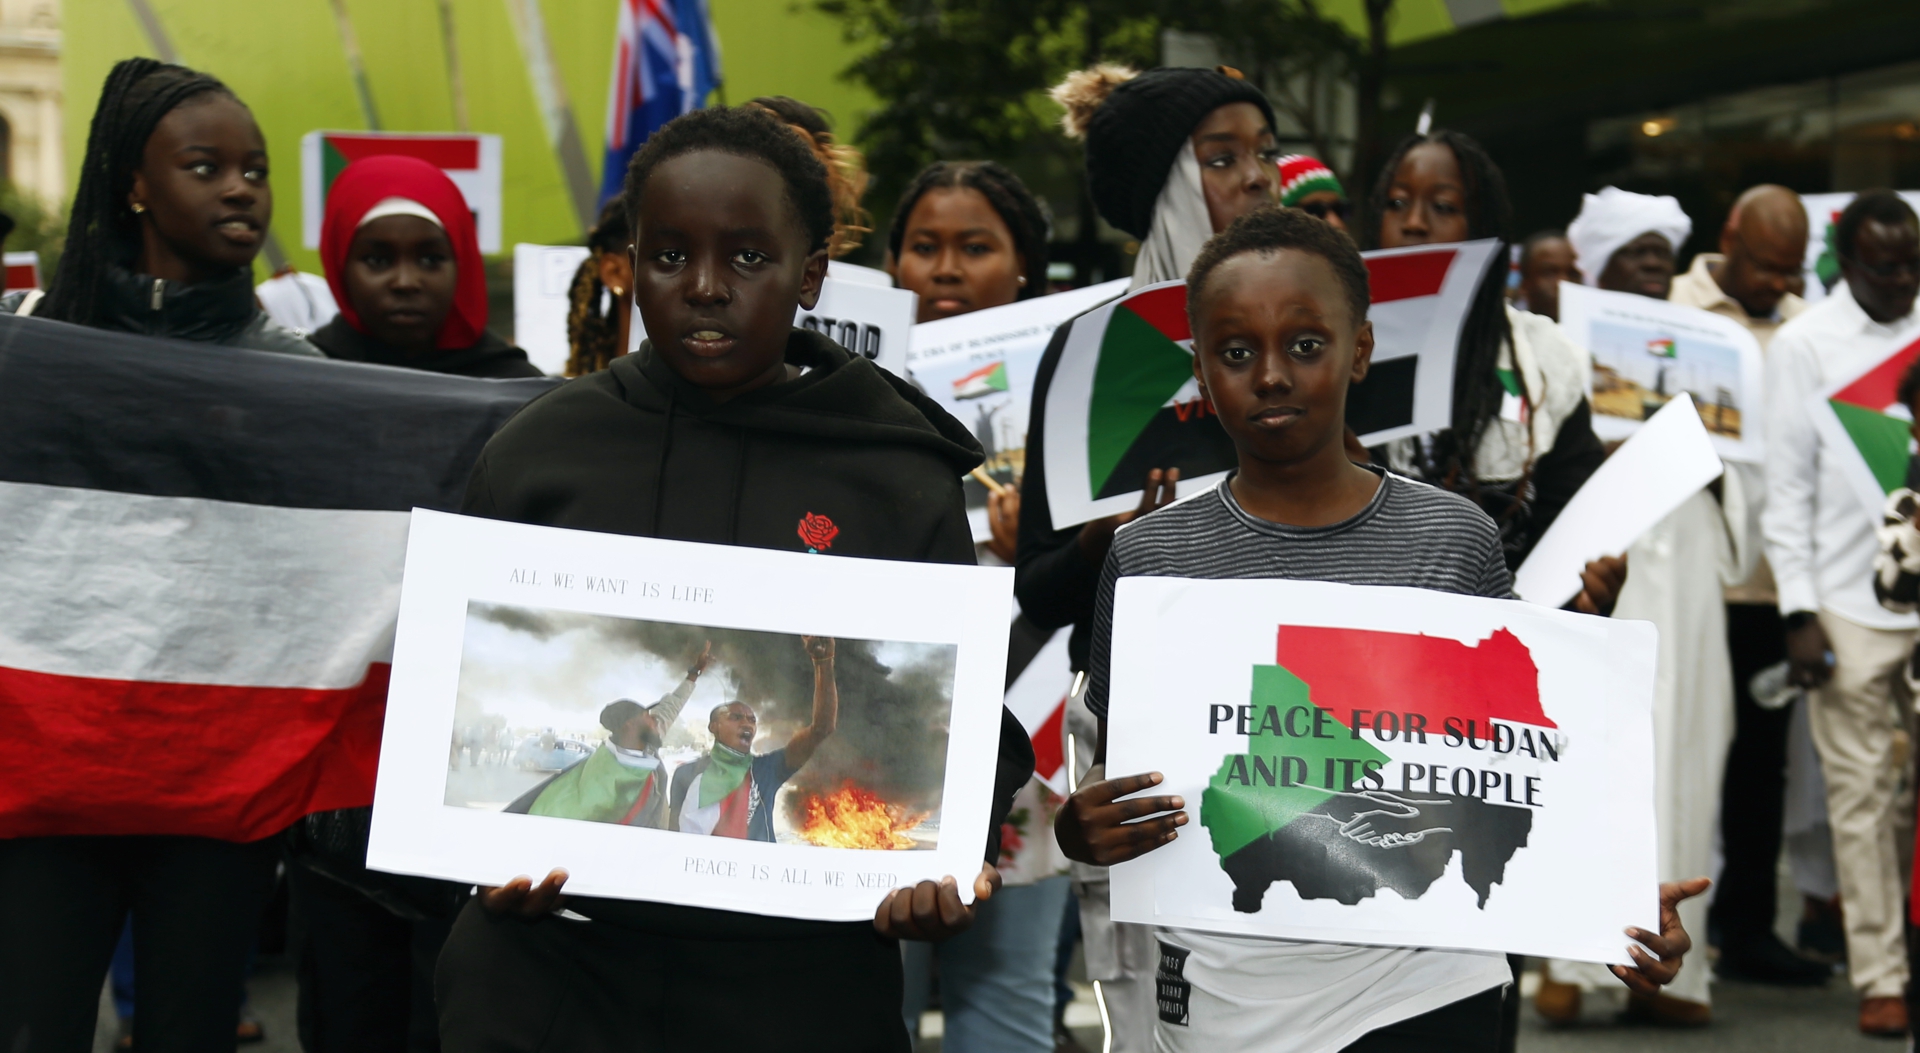 Marching for peace in Sudan